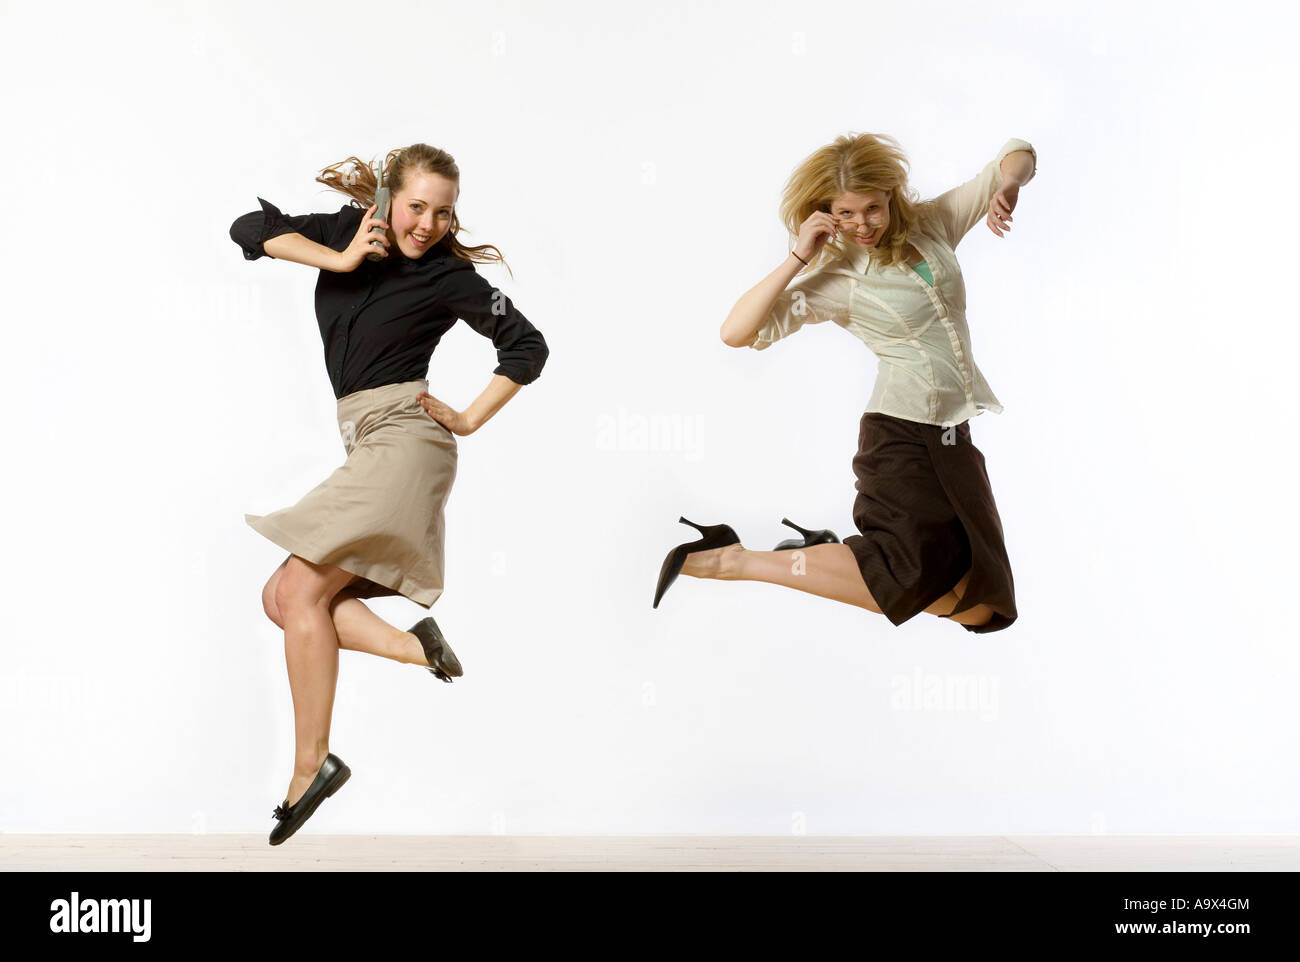 Two attractive young women dressed conservatively in business clothes jumping in the air. One is using a mobile phone/glasses Stock Photo